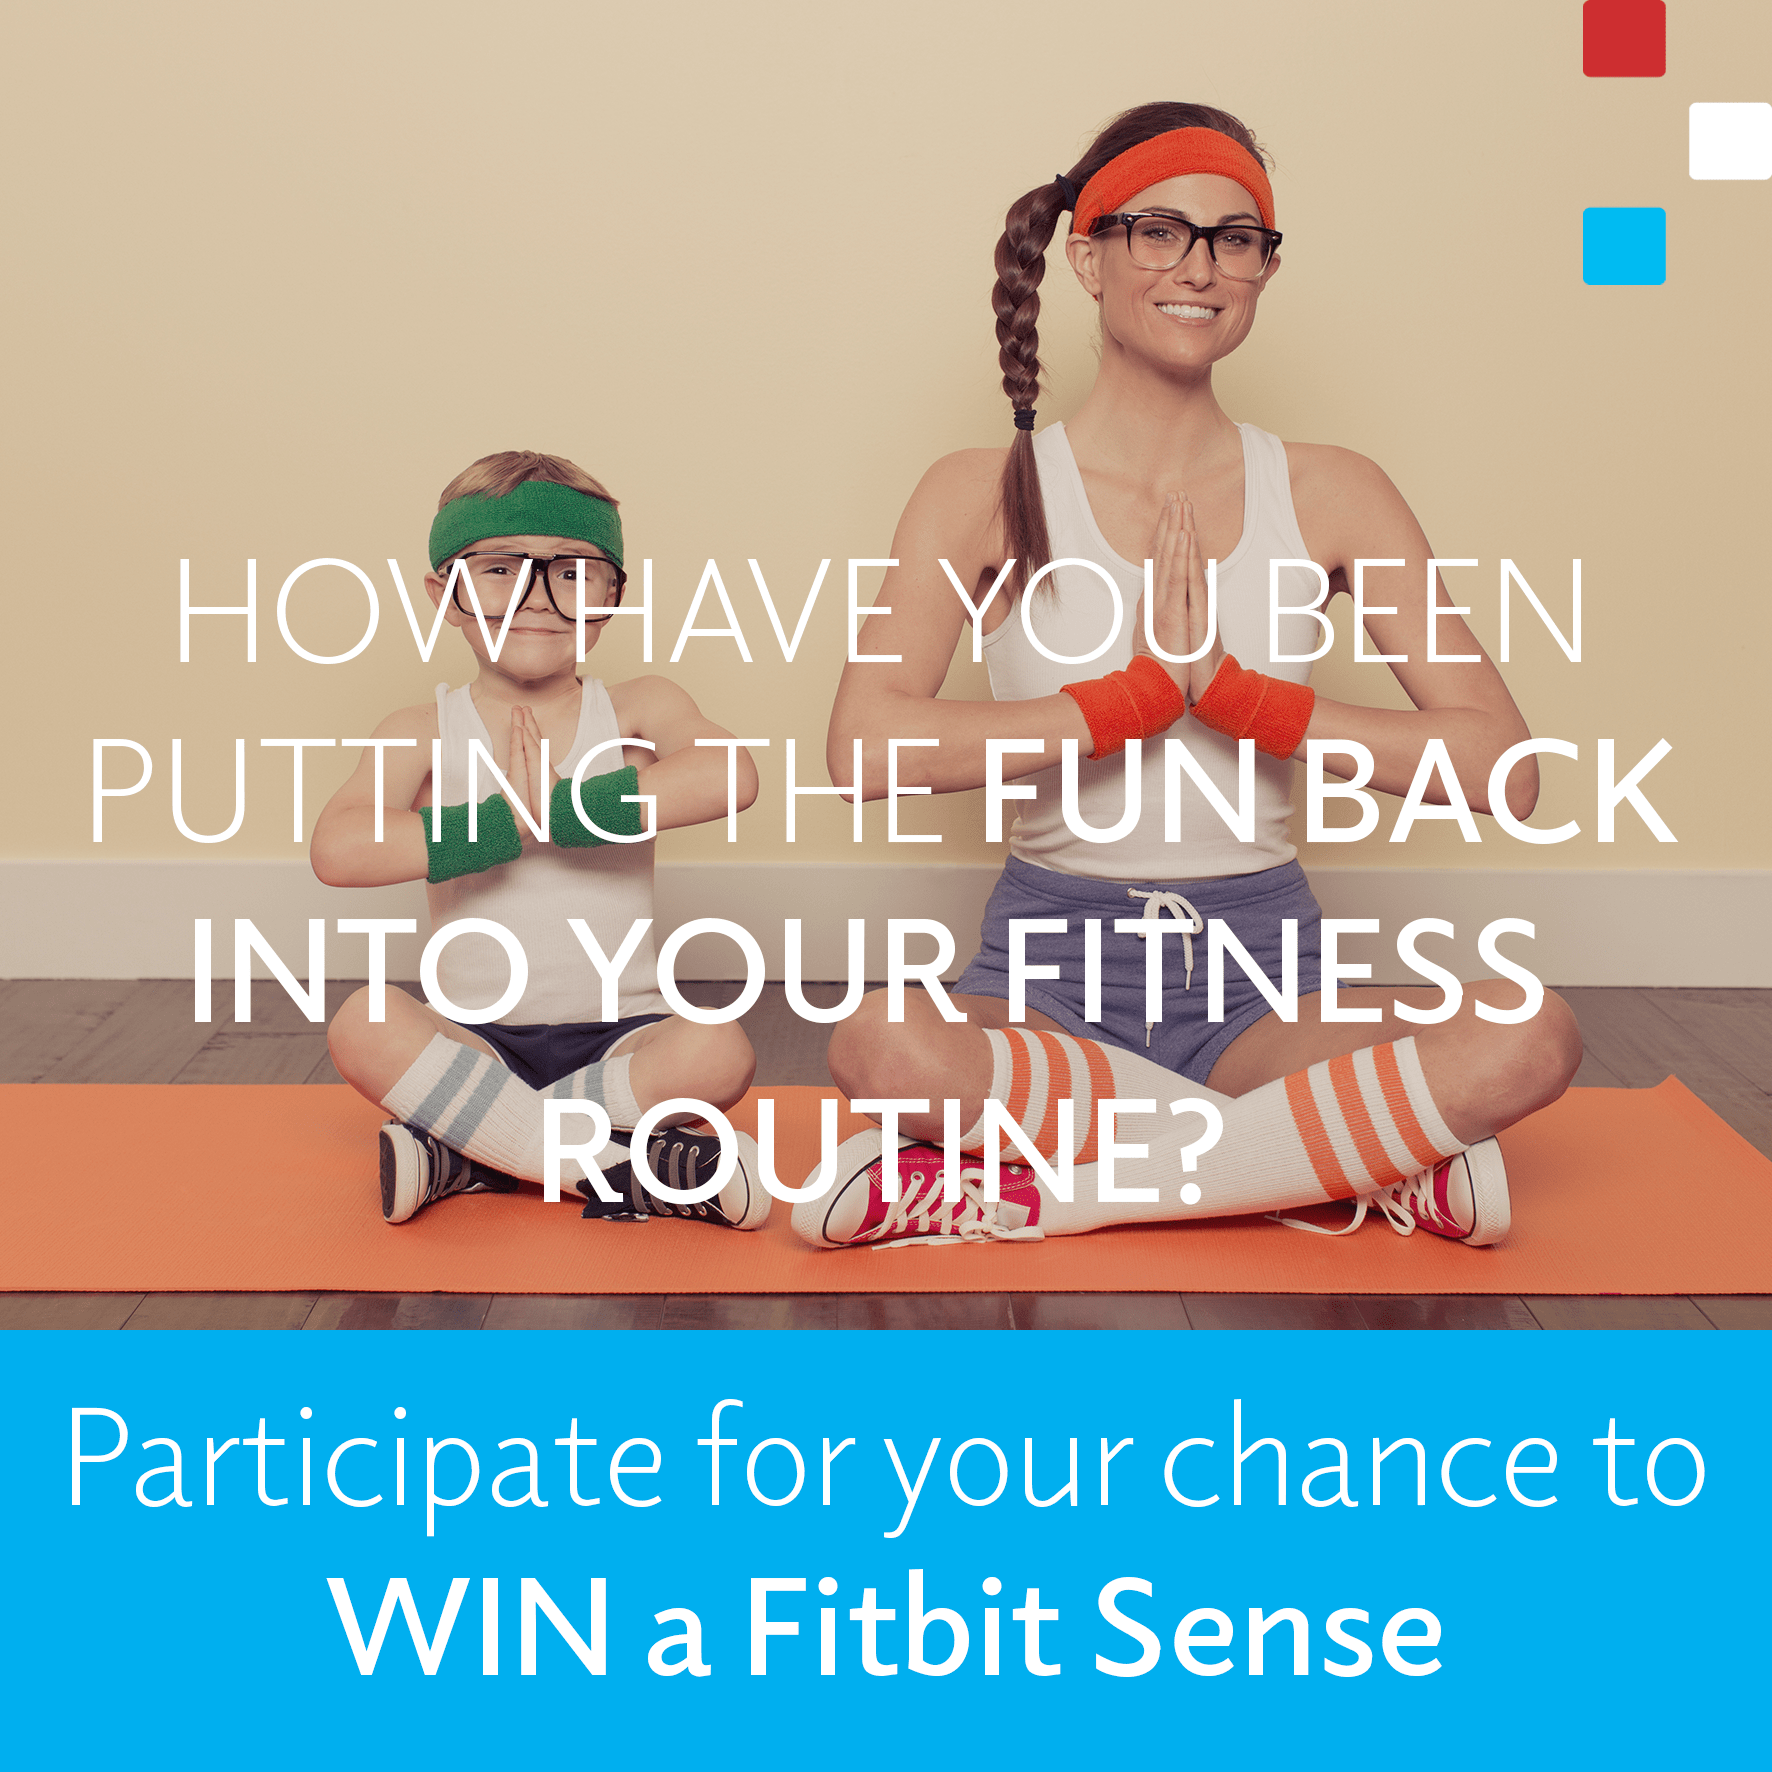 share to win a fitbit sense